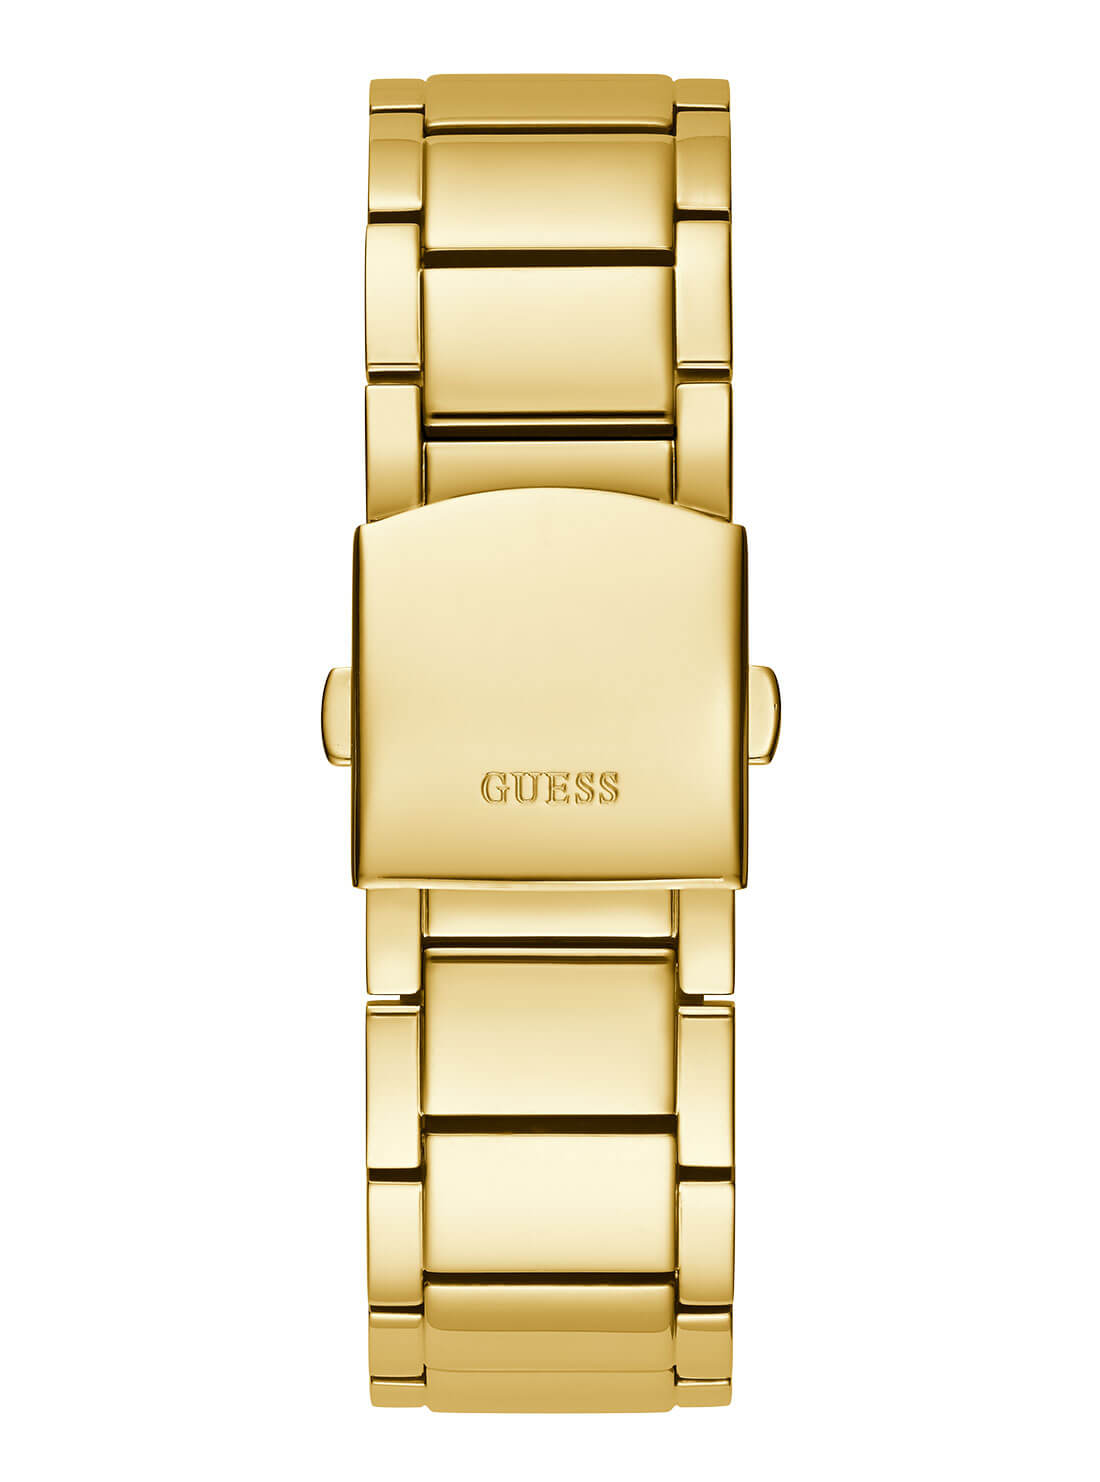 Gold Big Reveal Watch - GUESS